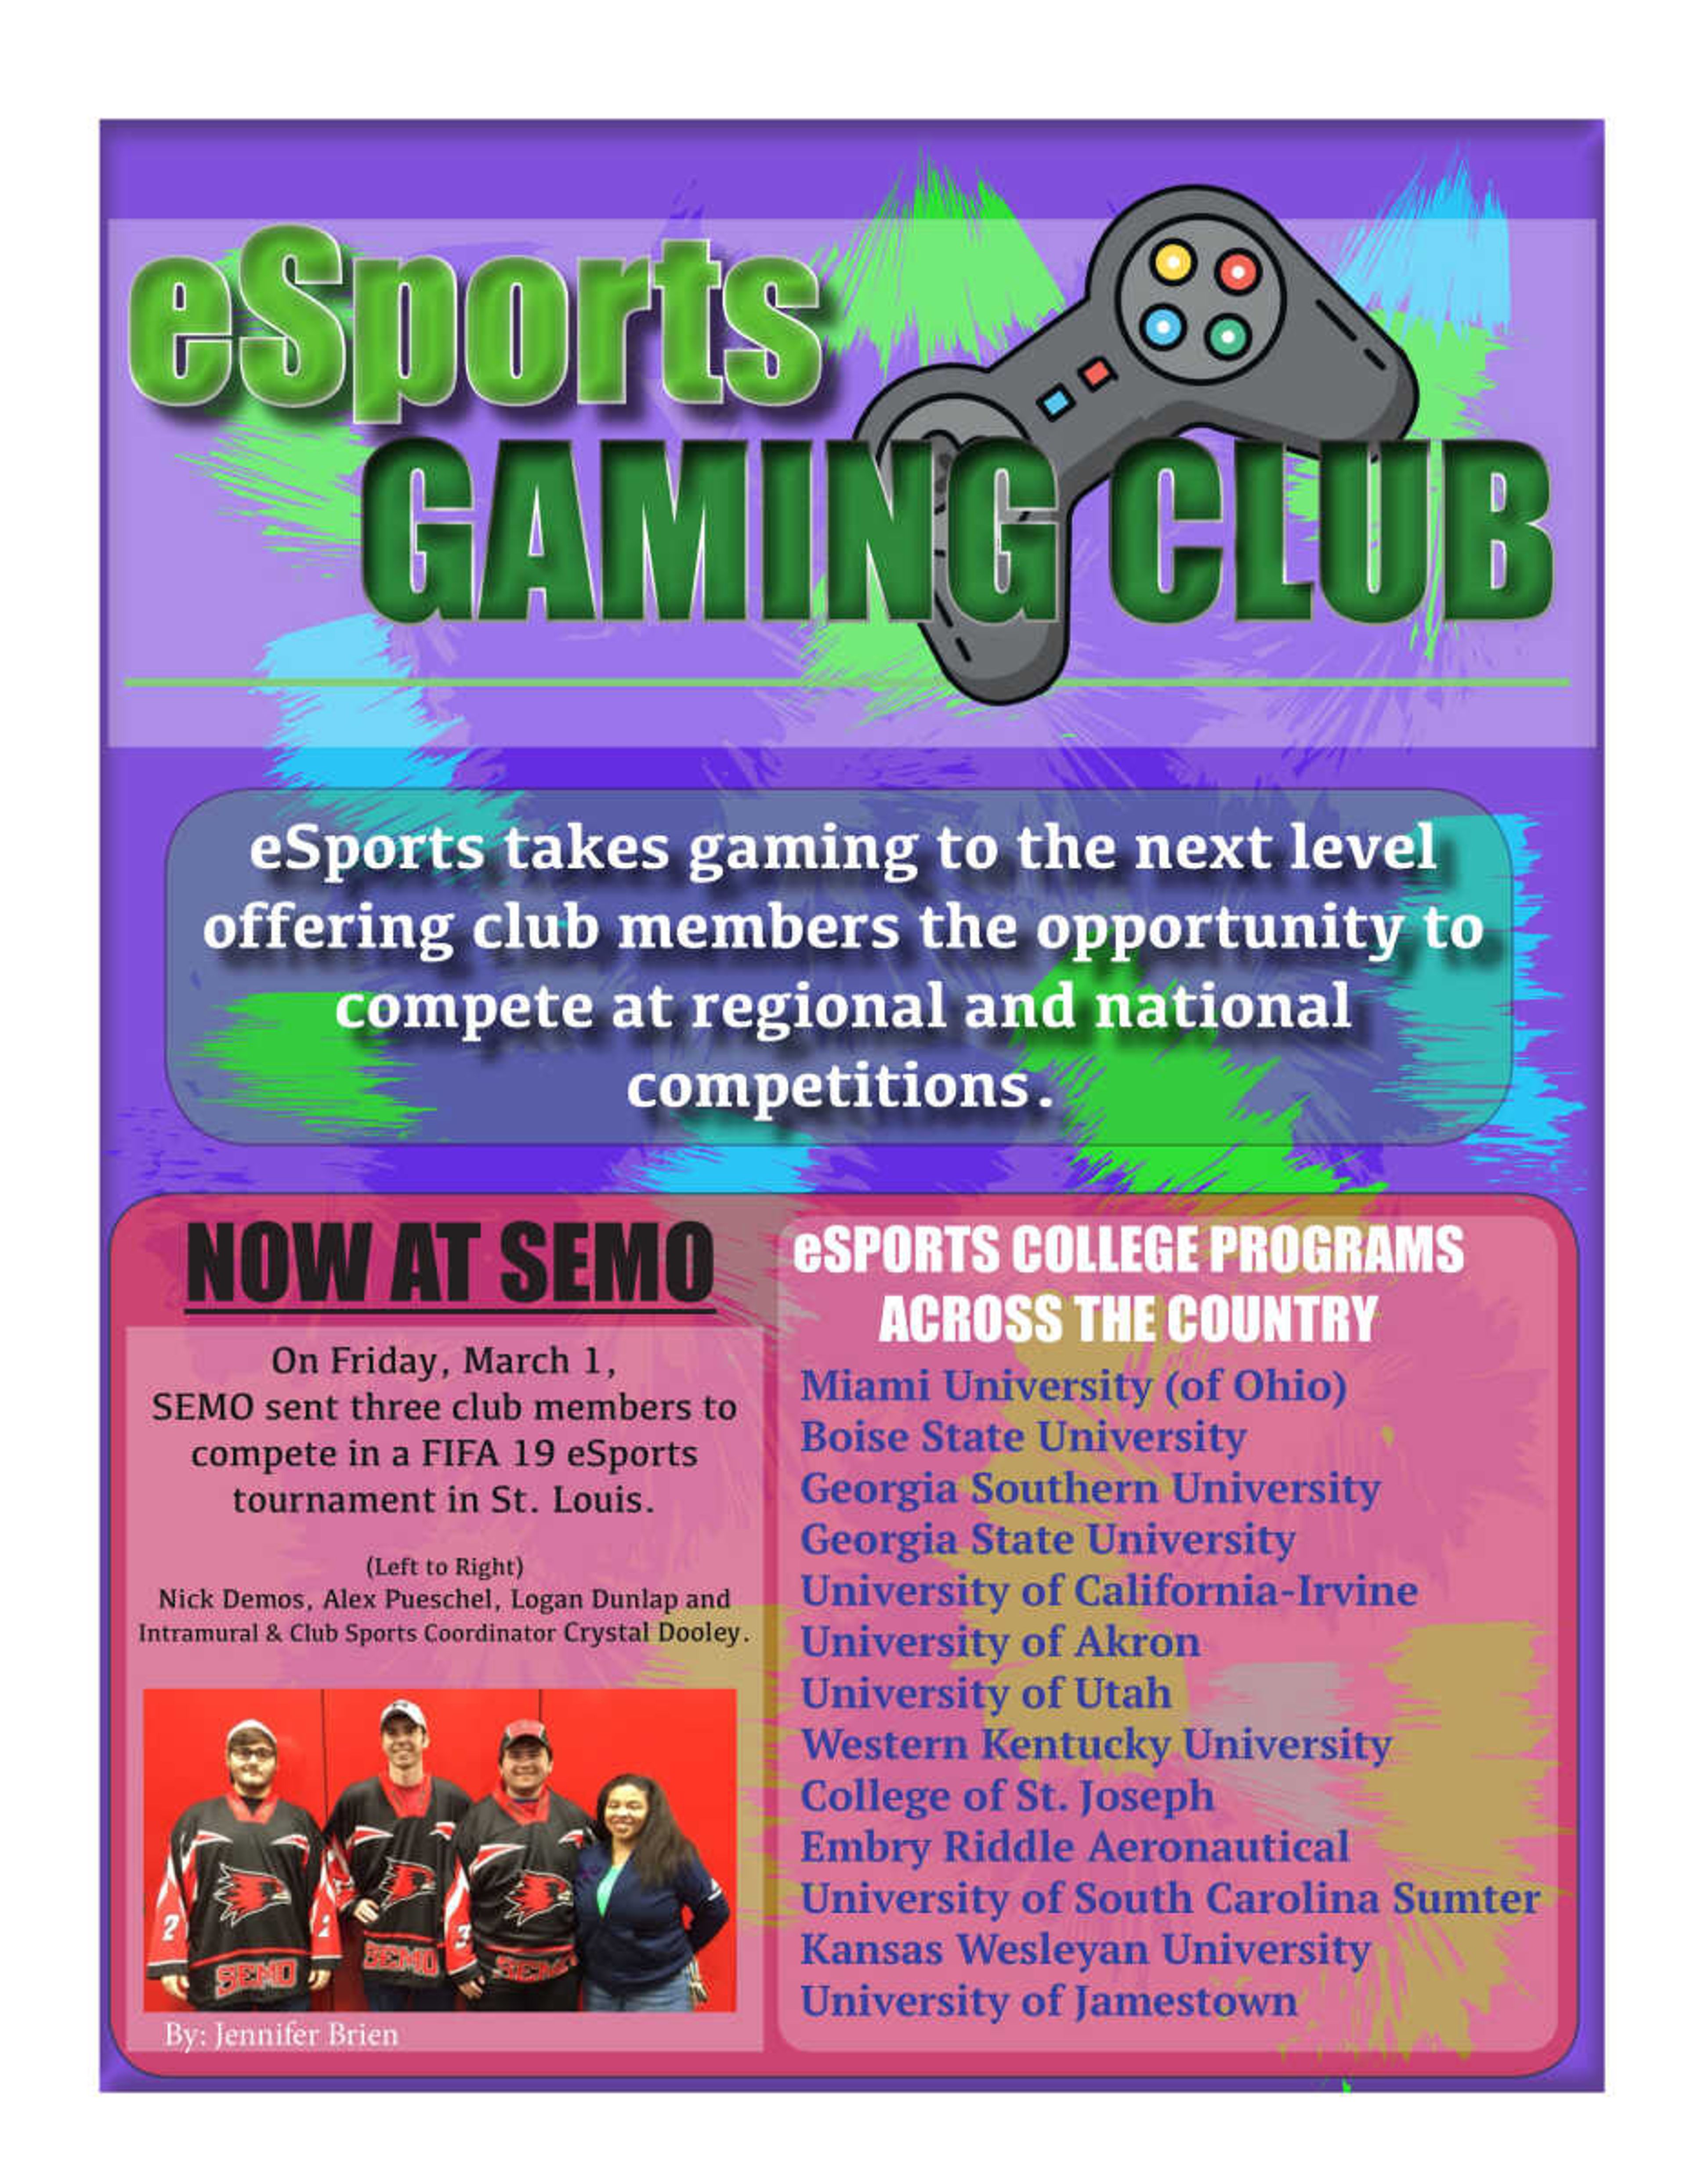 Competitive gaming team established as the newest club sport